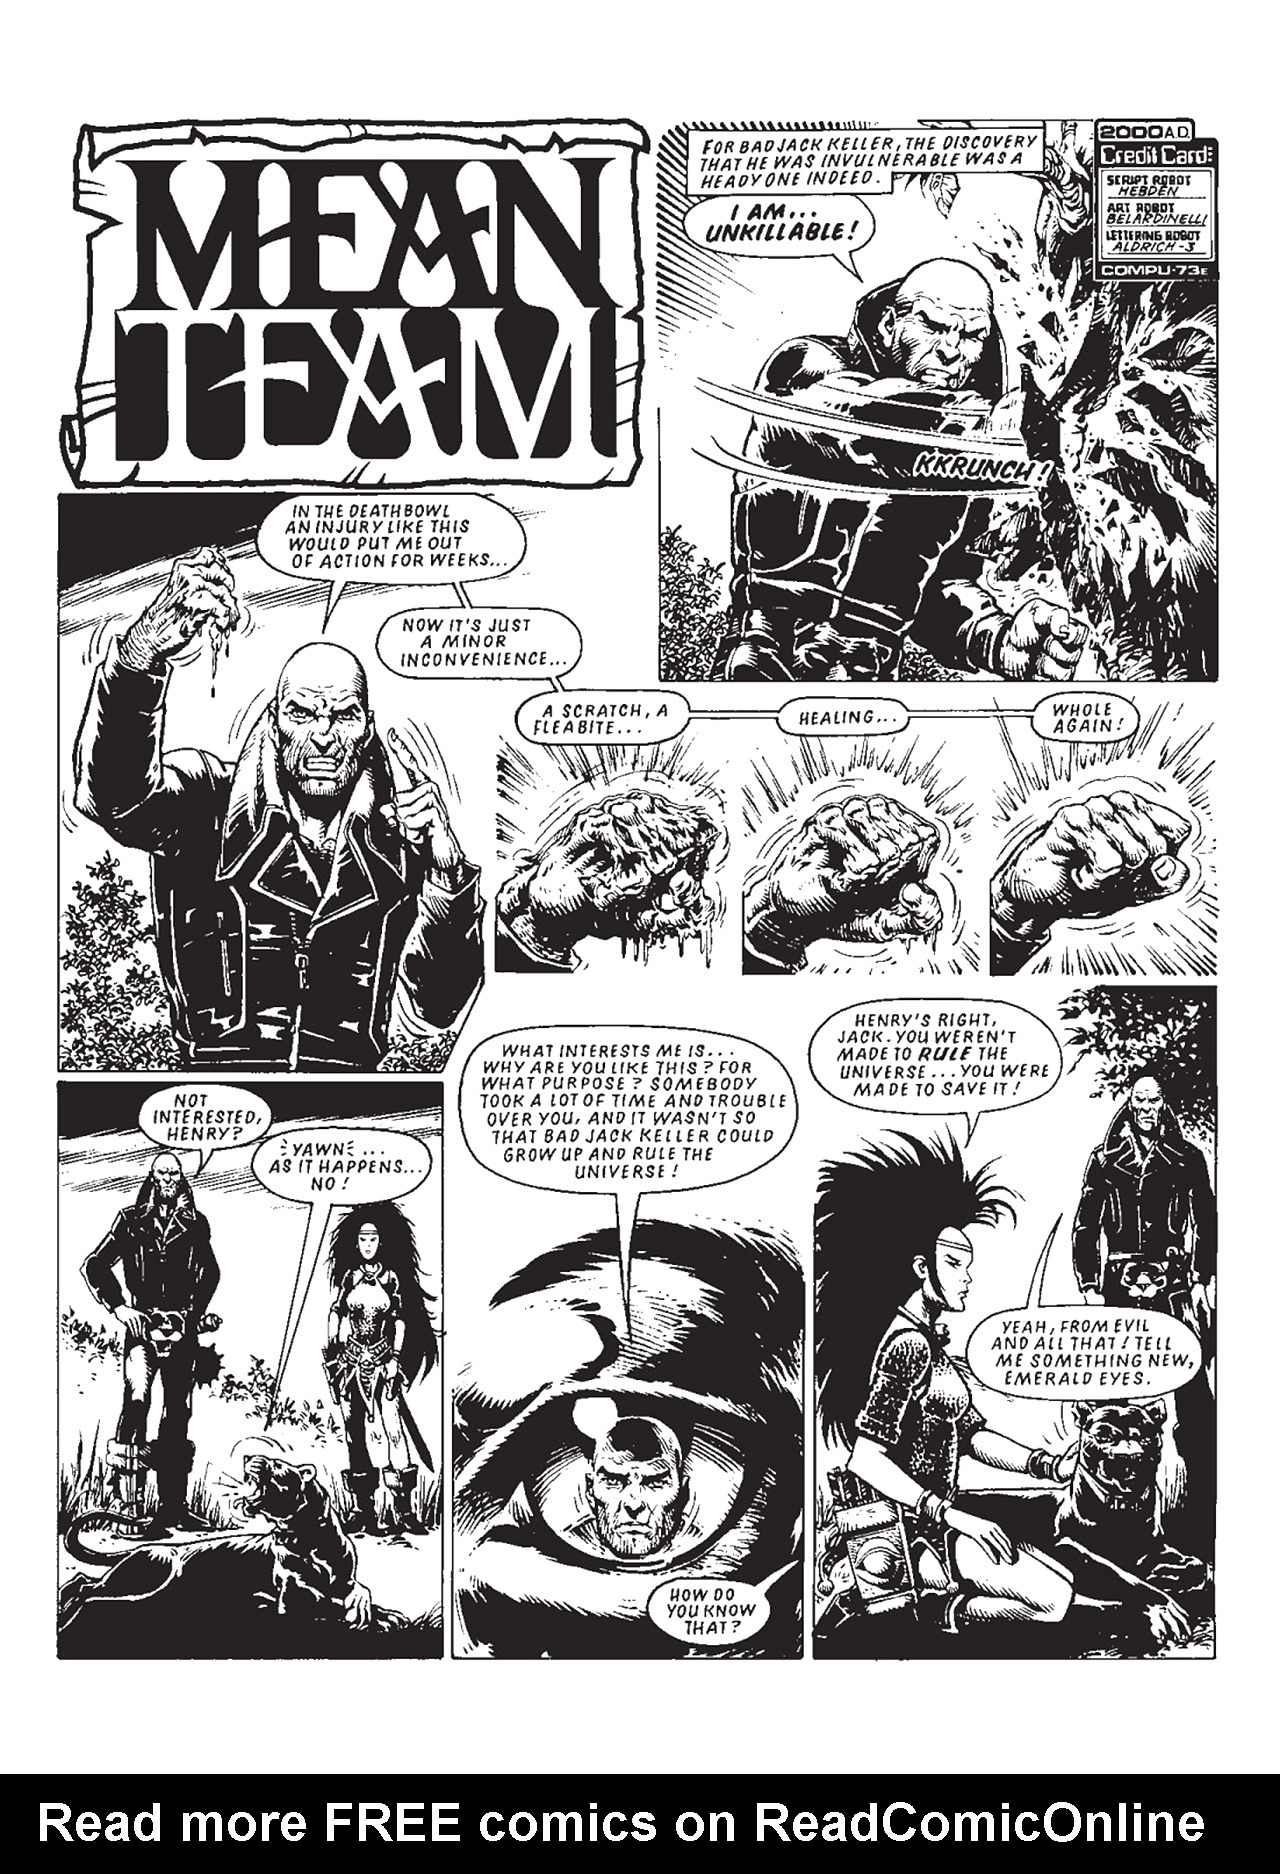 Read online Mean Team comic -  Issue # TPB - 129